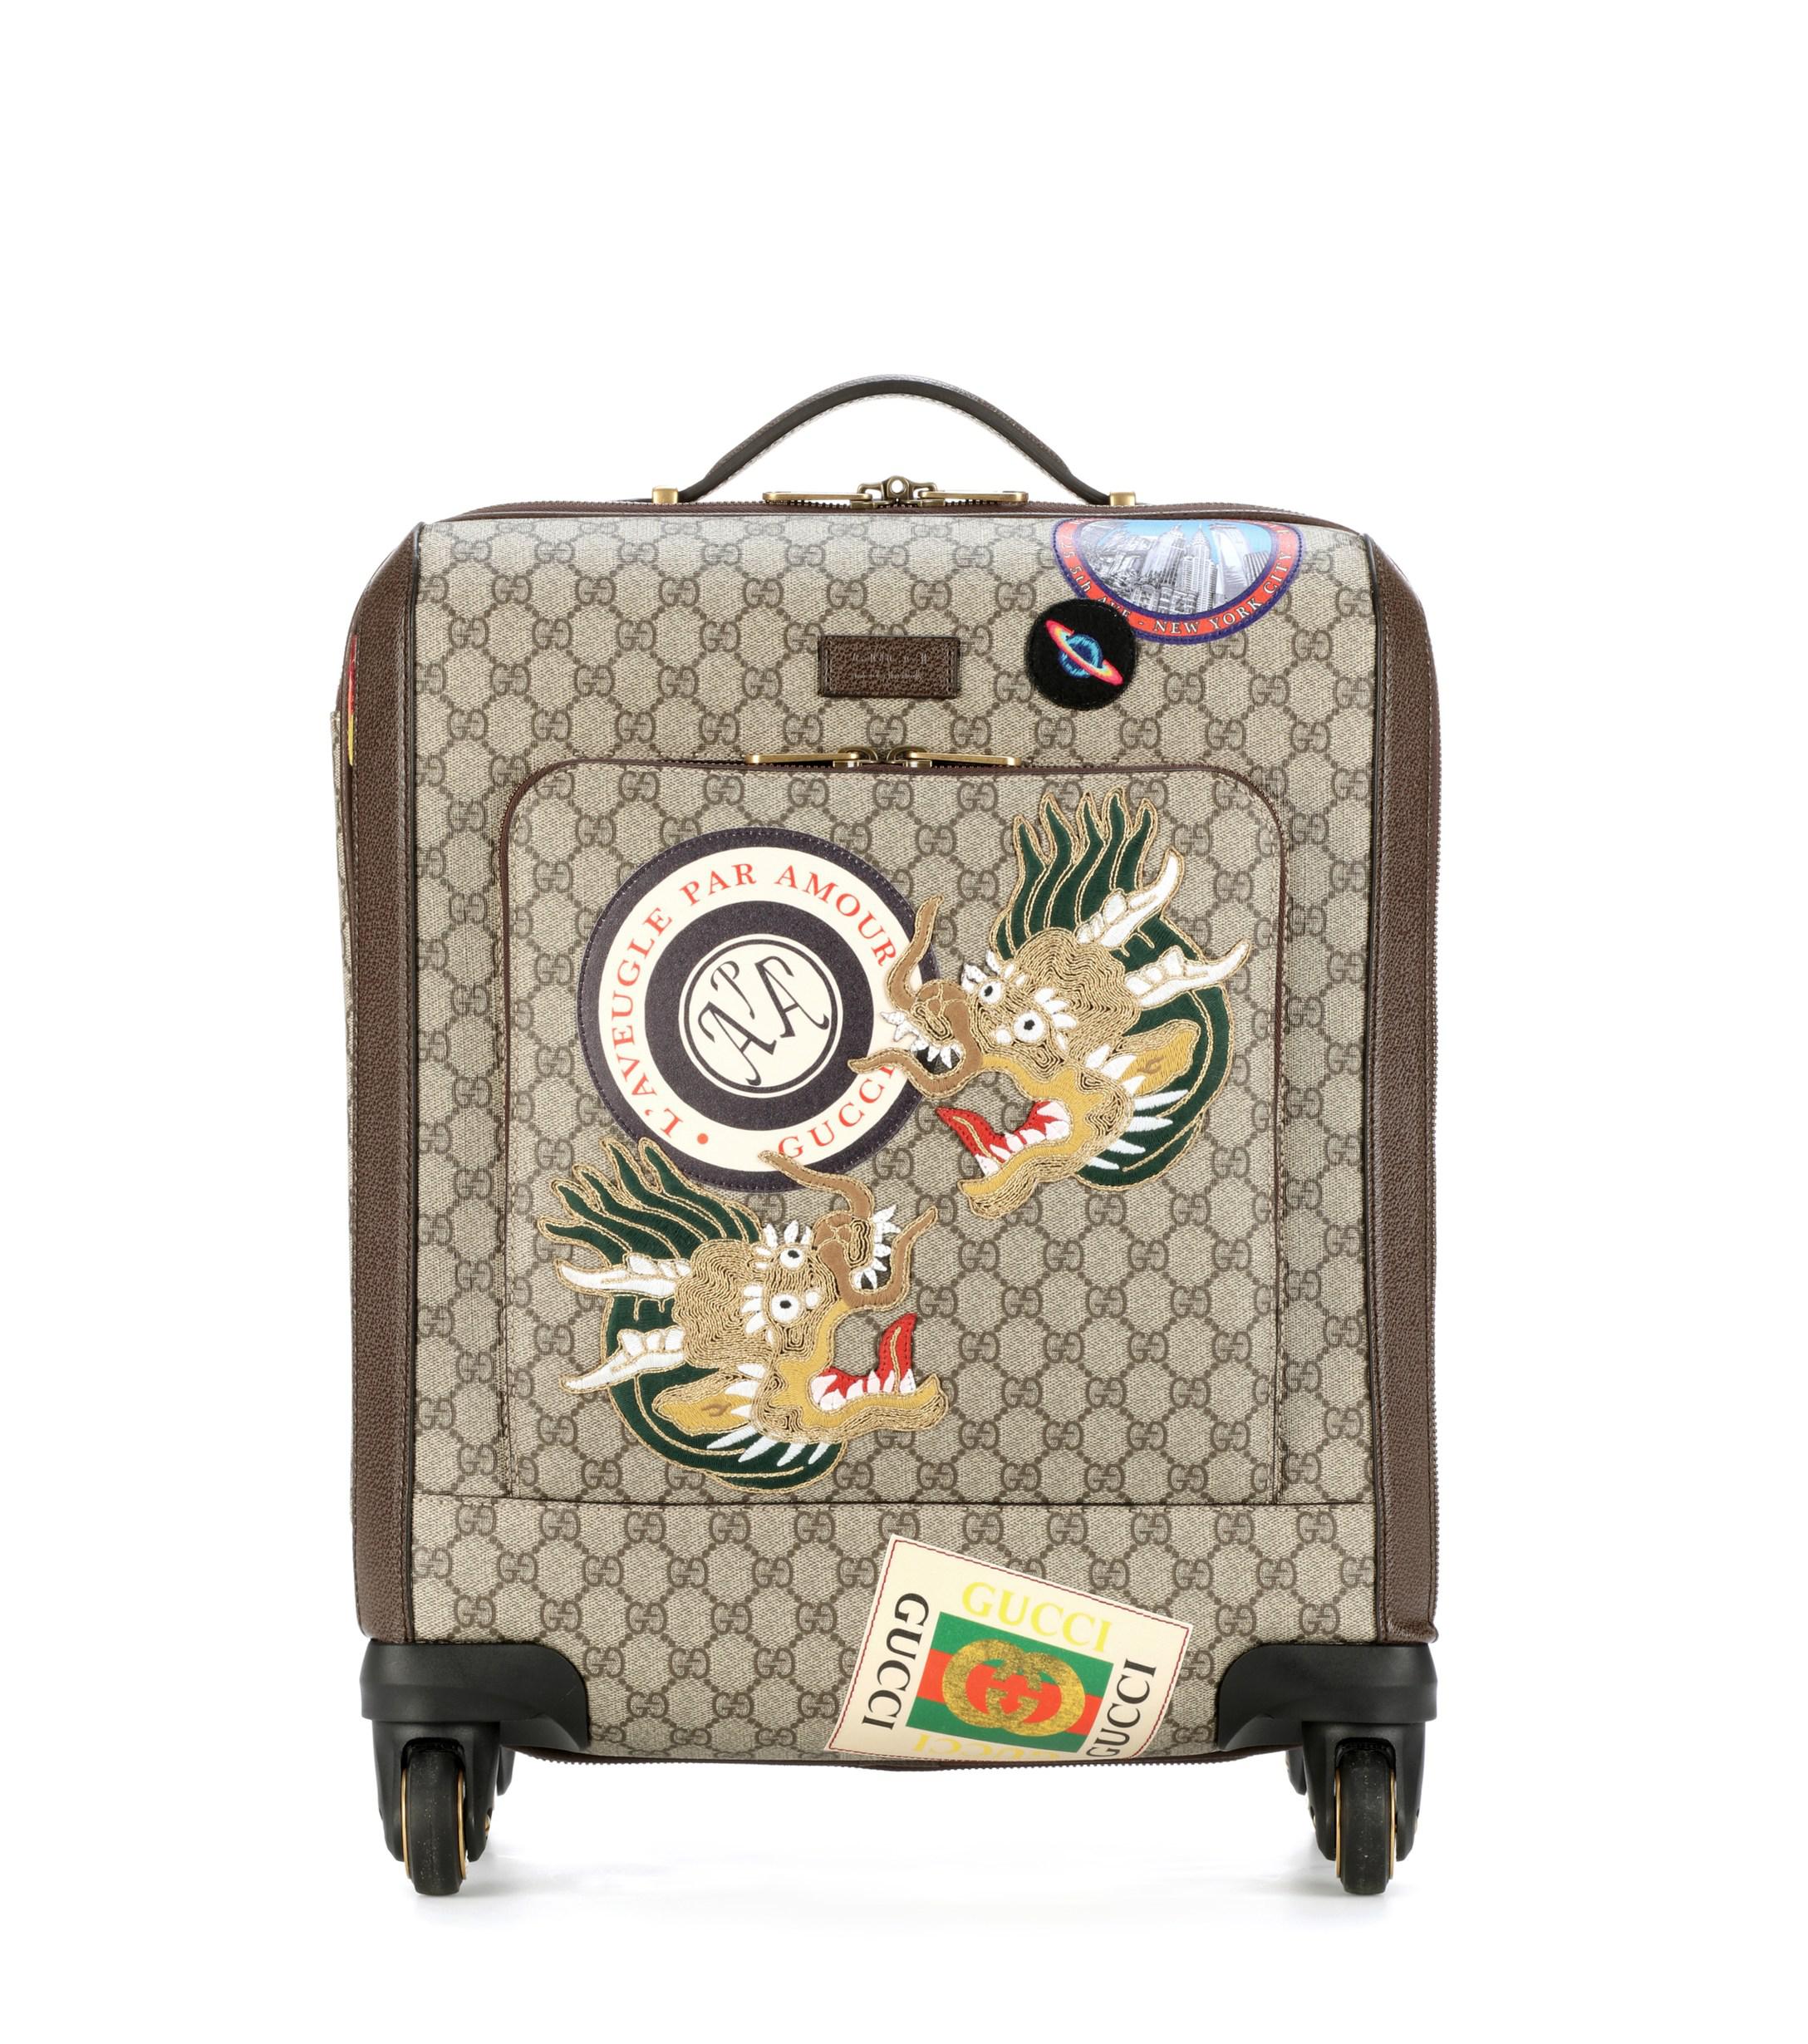 Gucci GG Supreme Carry-on Suitcase - Lyst